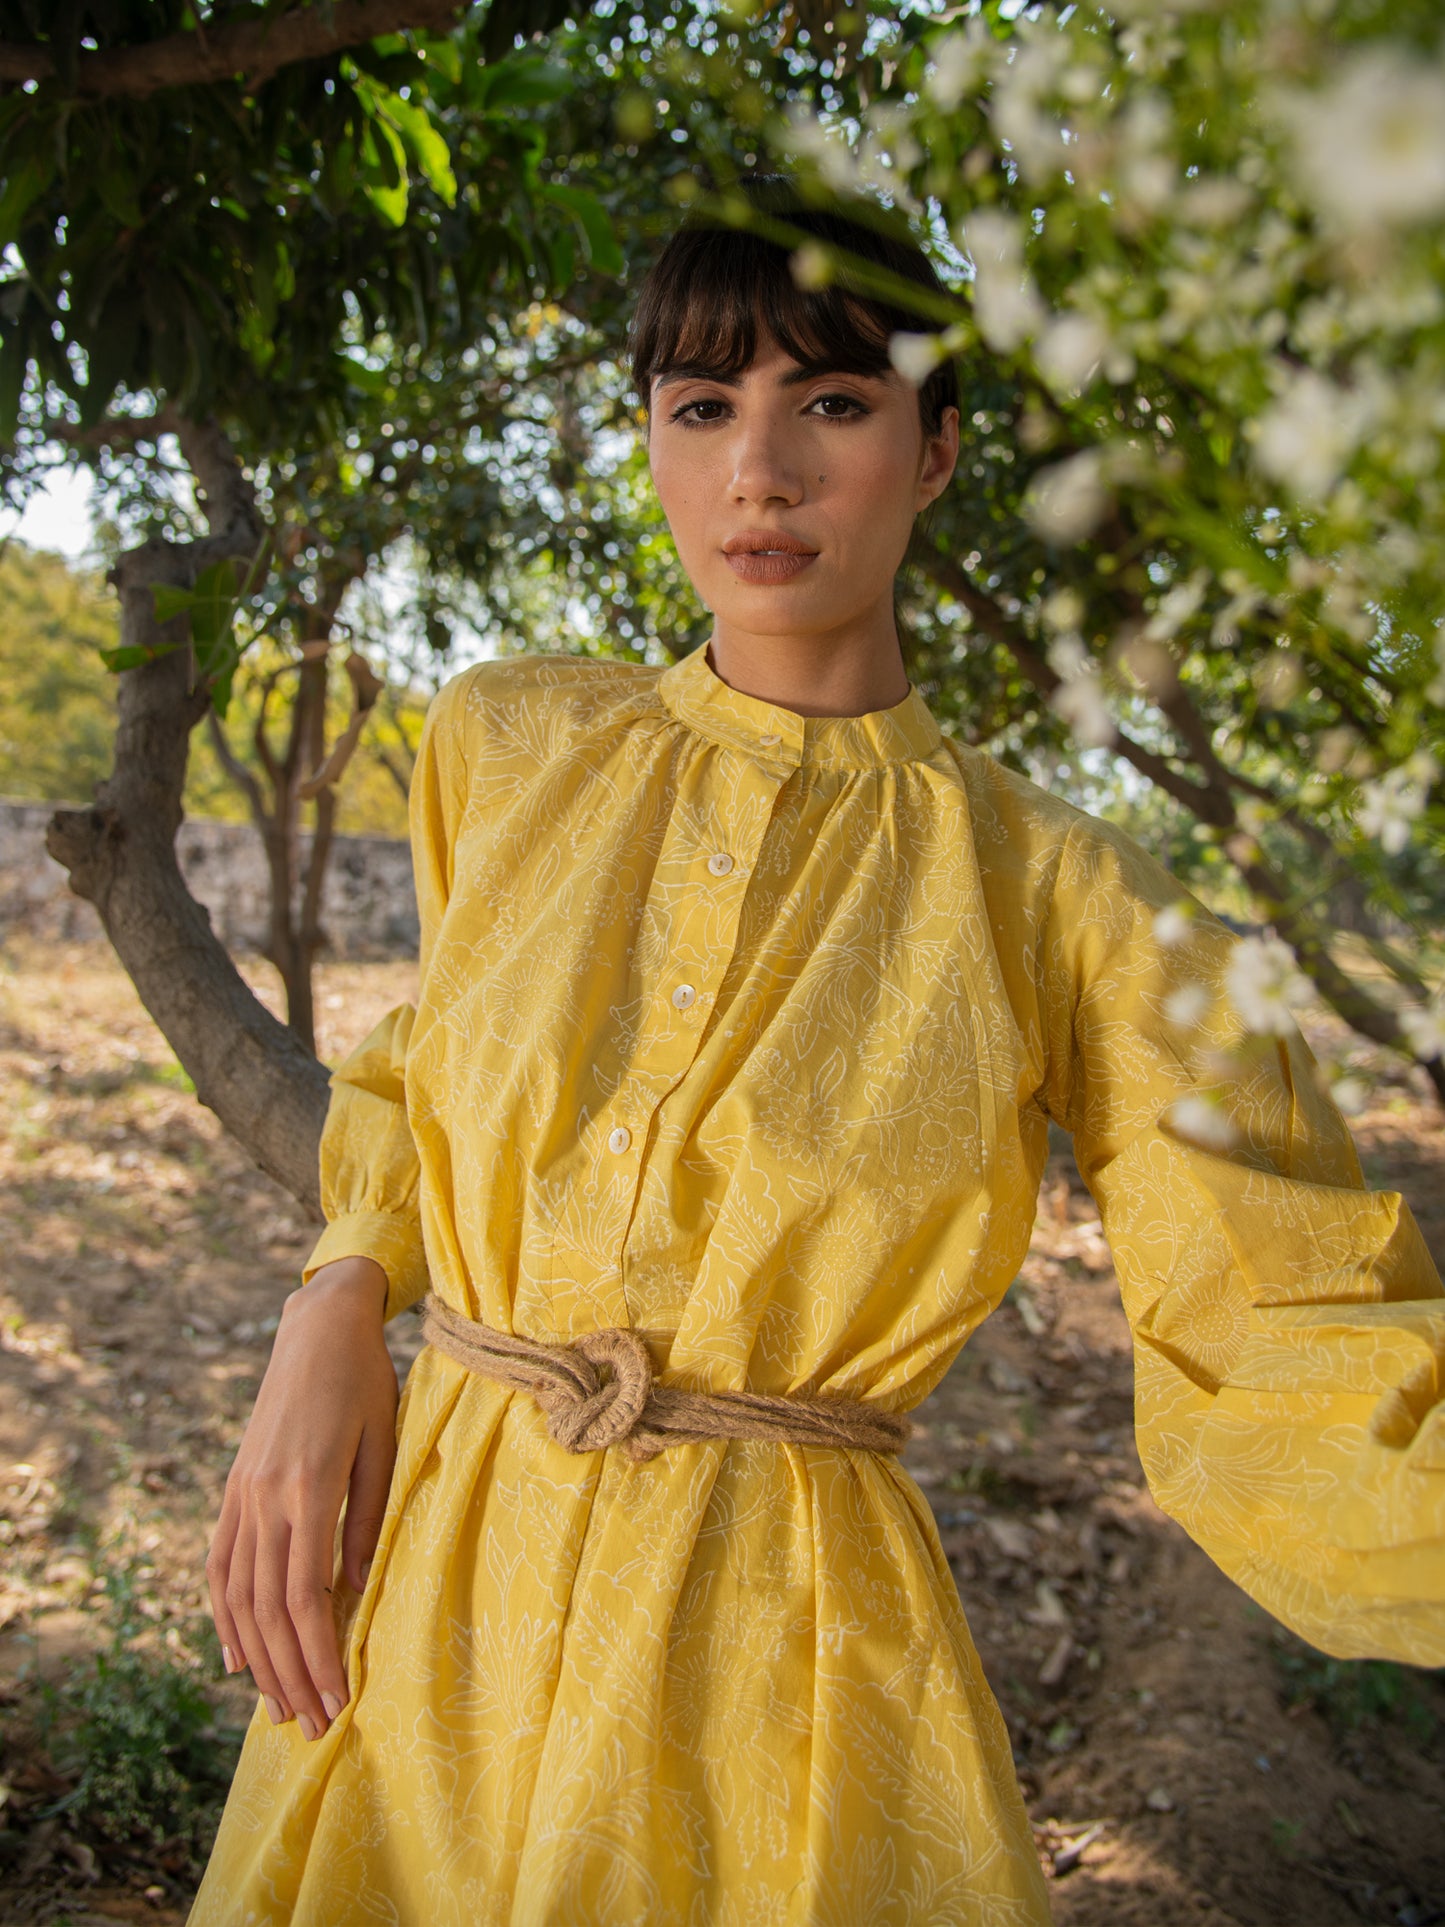 Sunny Side Up Tunic- Yellow Hand Block Printed Cotton Tunic Top